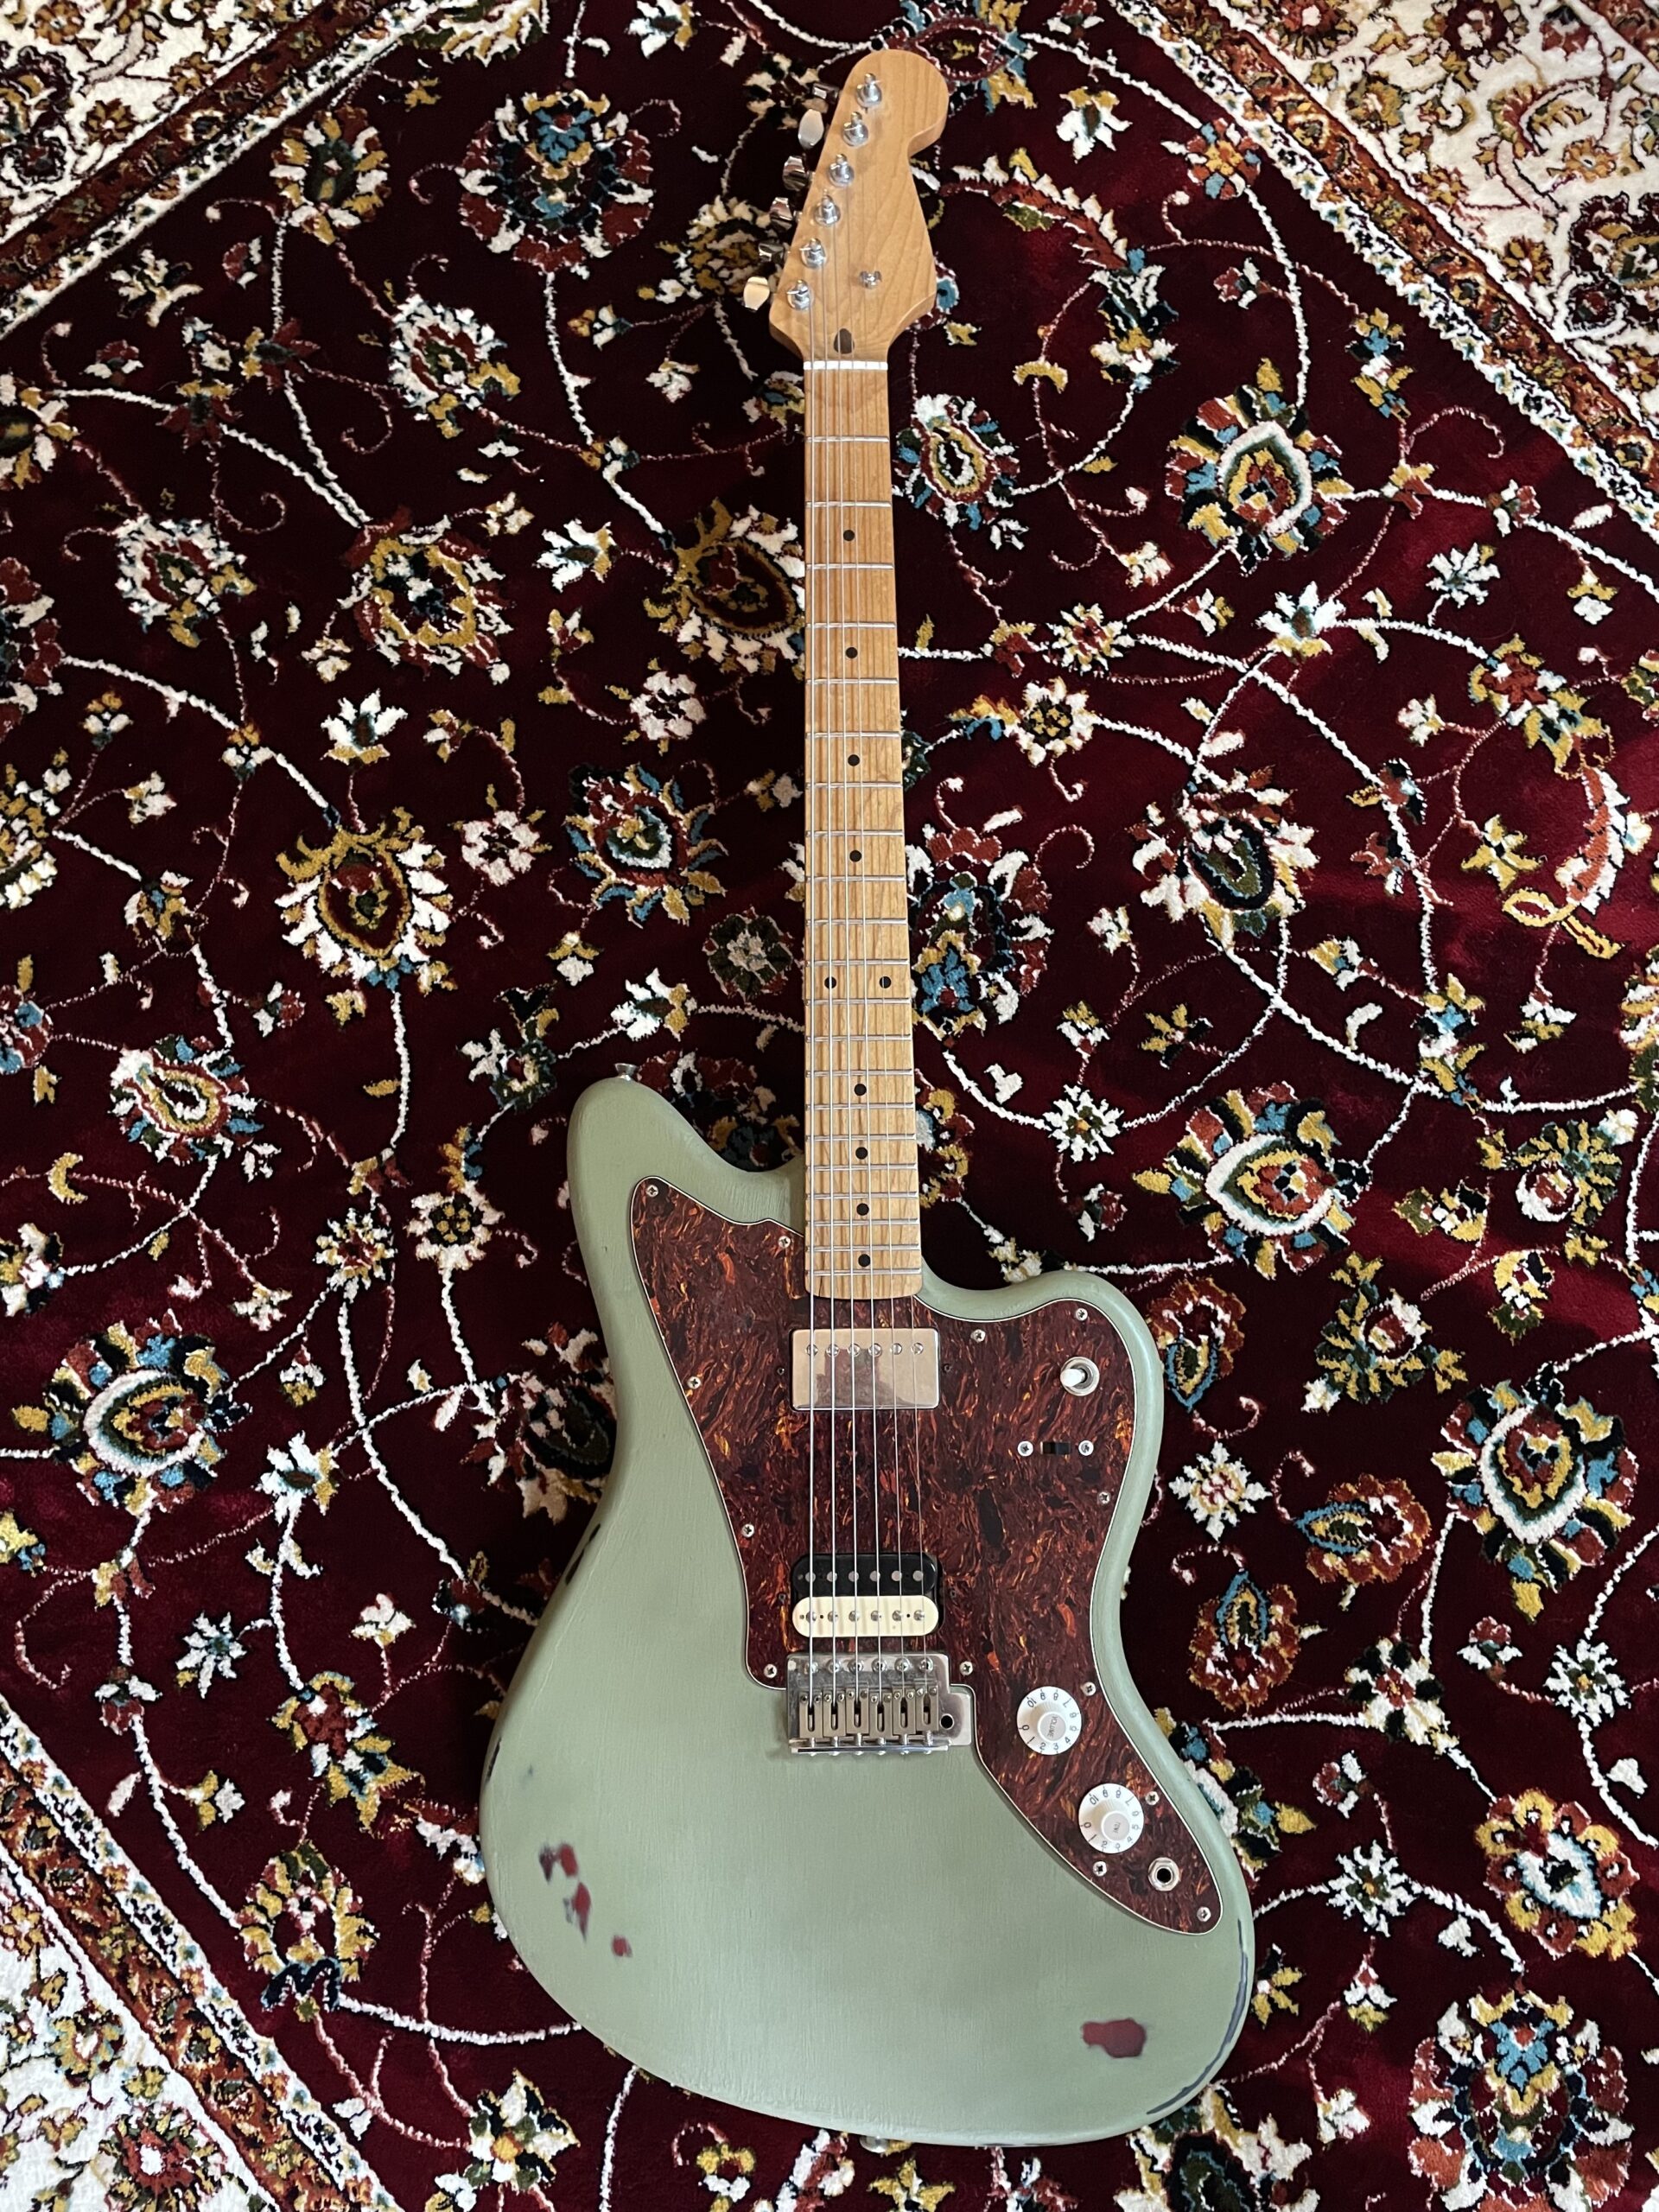 Olly's Modded Jagmaster - This old squire body has been brought to life - refinished and modded with a coil split switch and new pickups & hardware, topped with a GA Roasted maple neck! Amazing build!